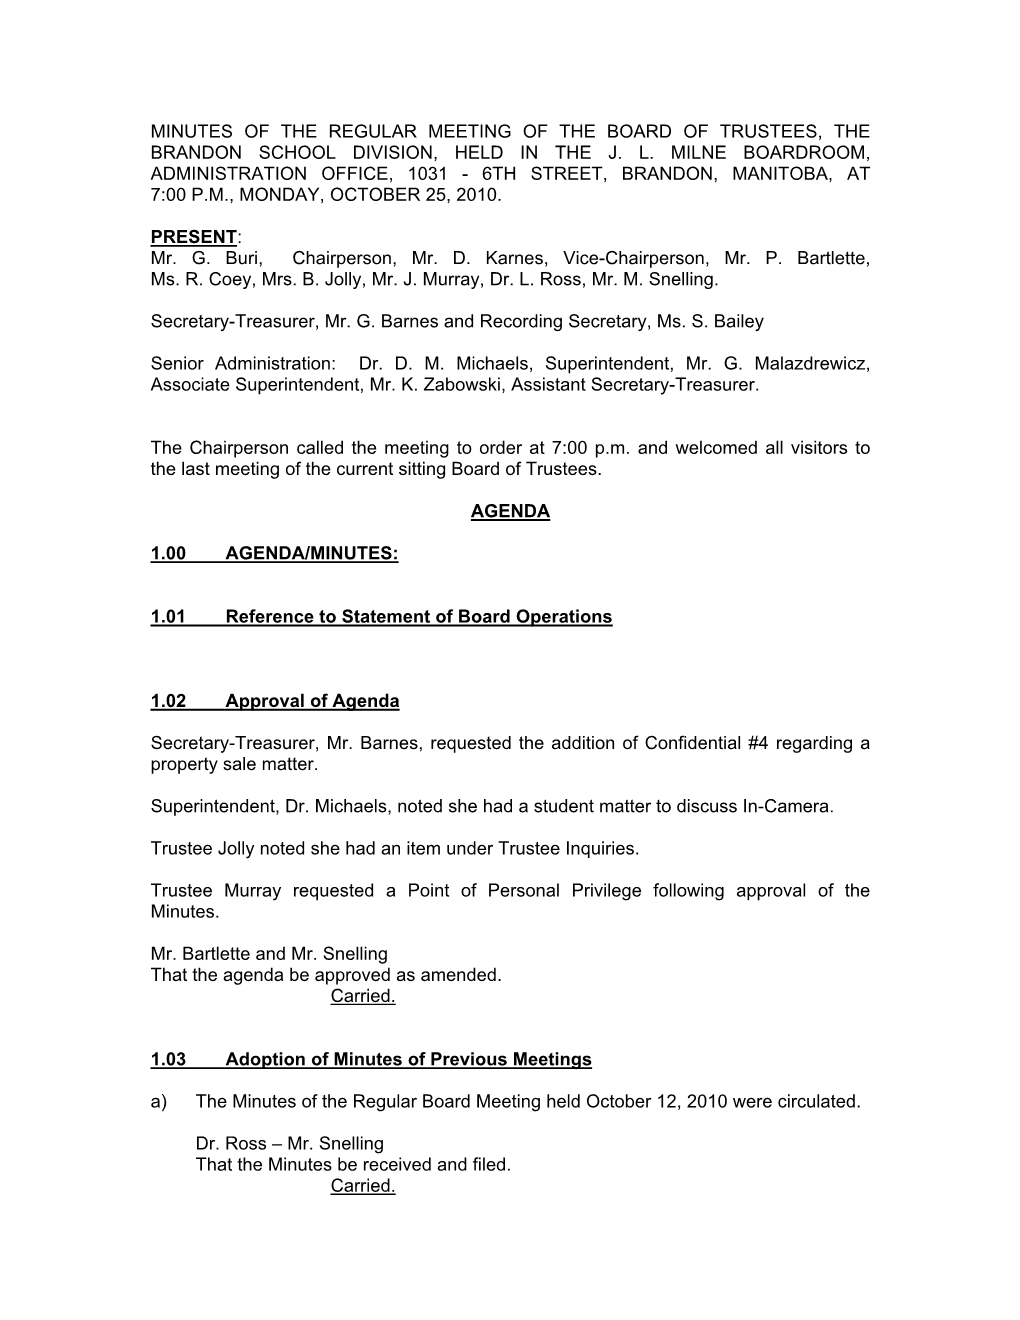 Minutes of the Regular Meeting of the Board of Trustees, the Brandon School Division, Held in the J